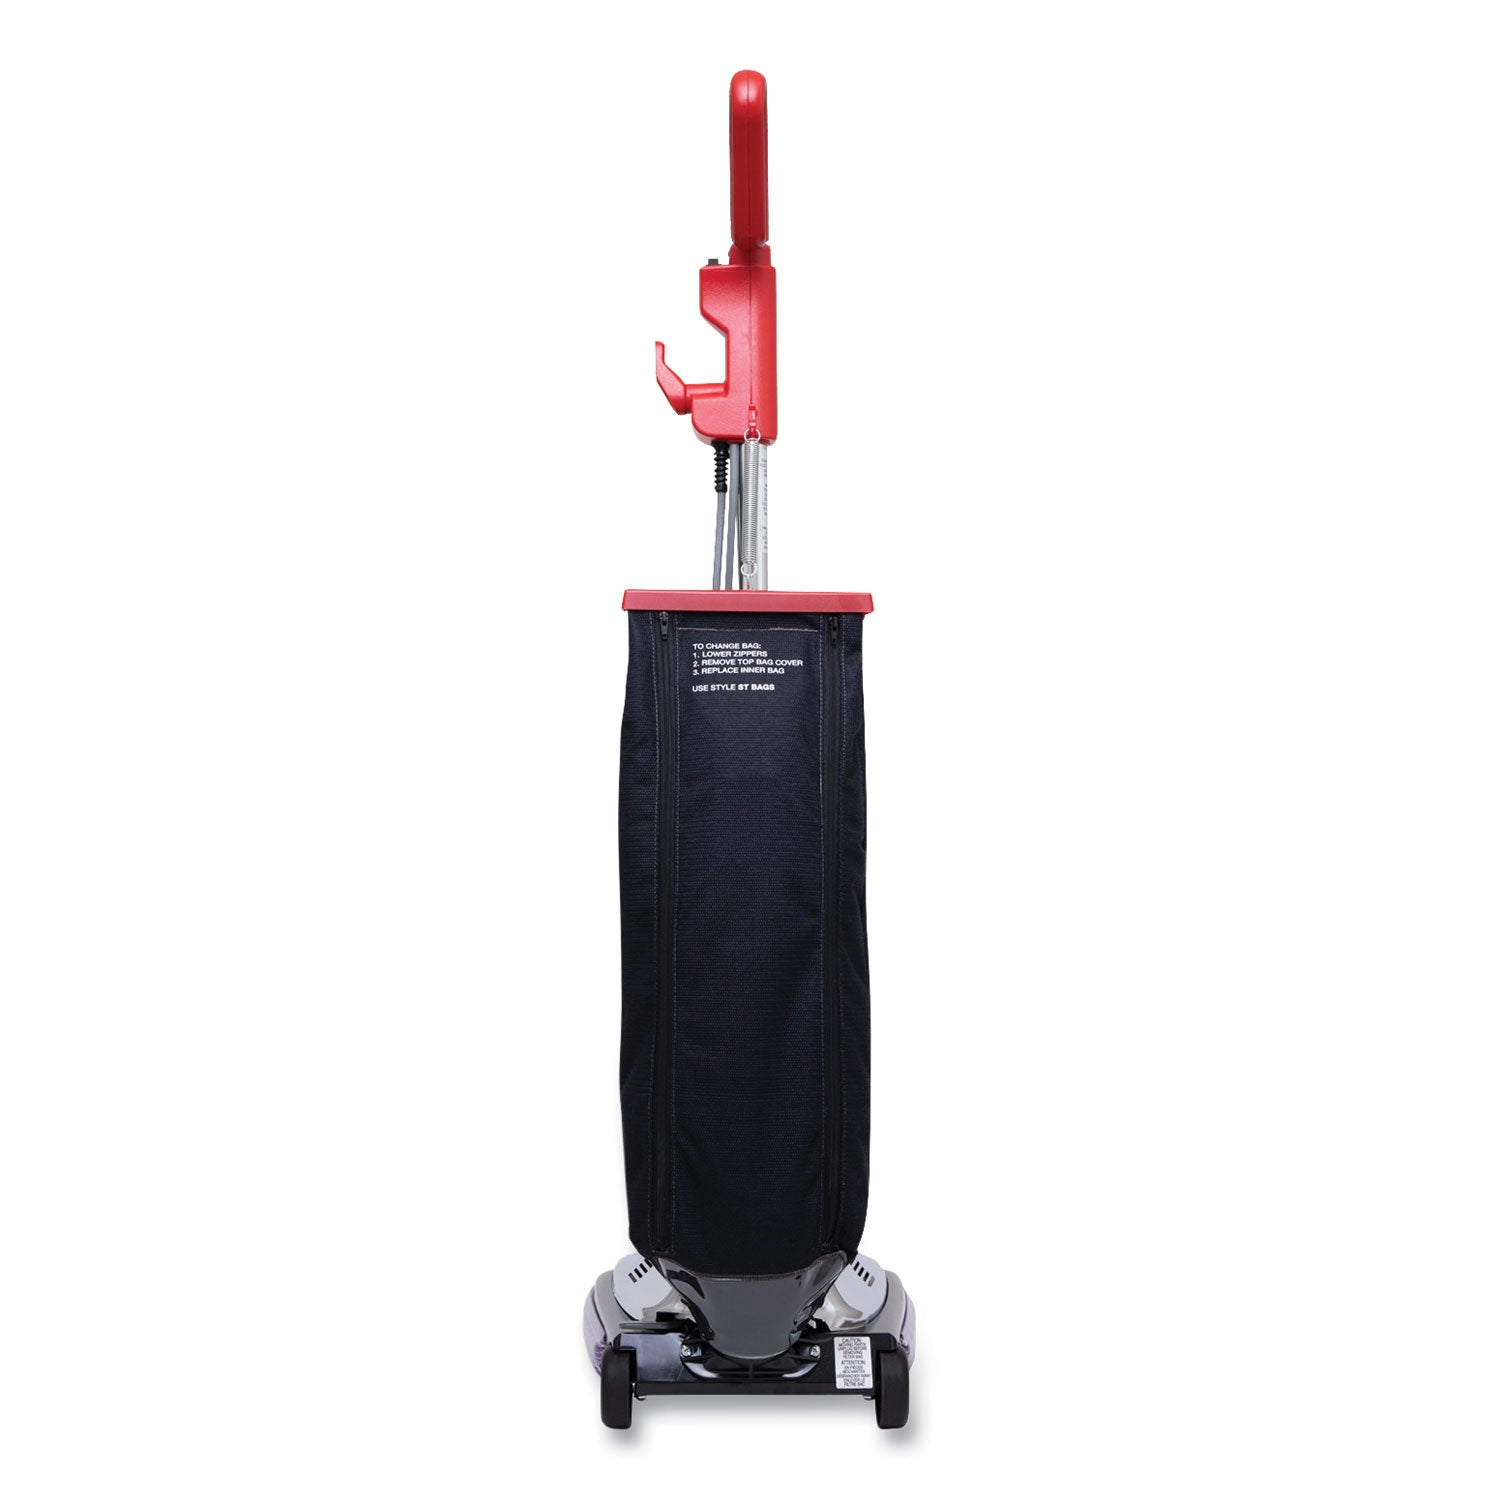 tradition-quietclean-upright-vacuum-sc889a-12-cleaning-path-gray-red-black_eursc889d - 2